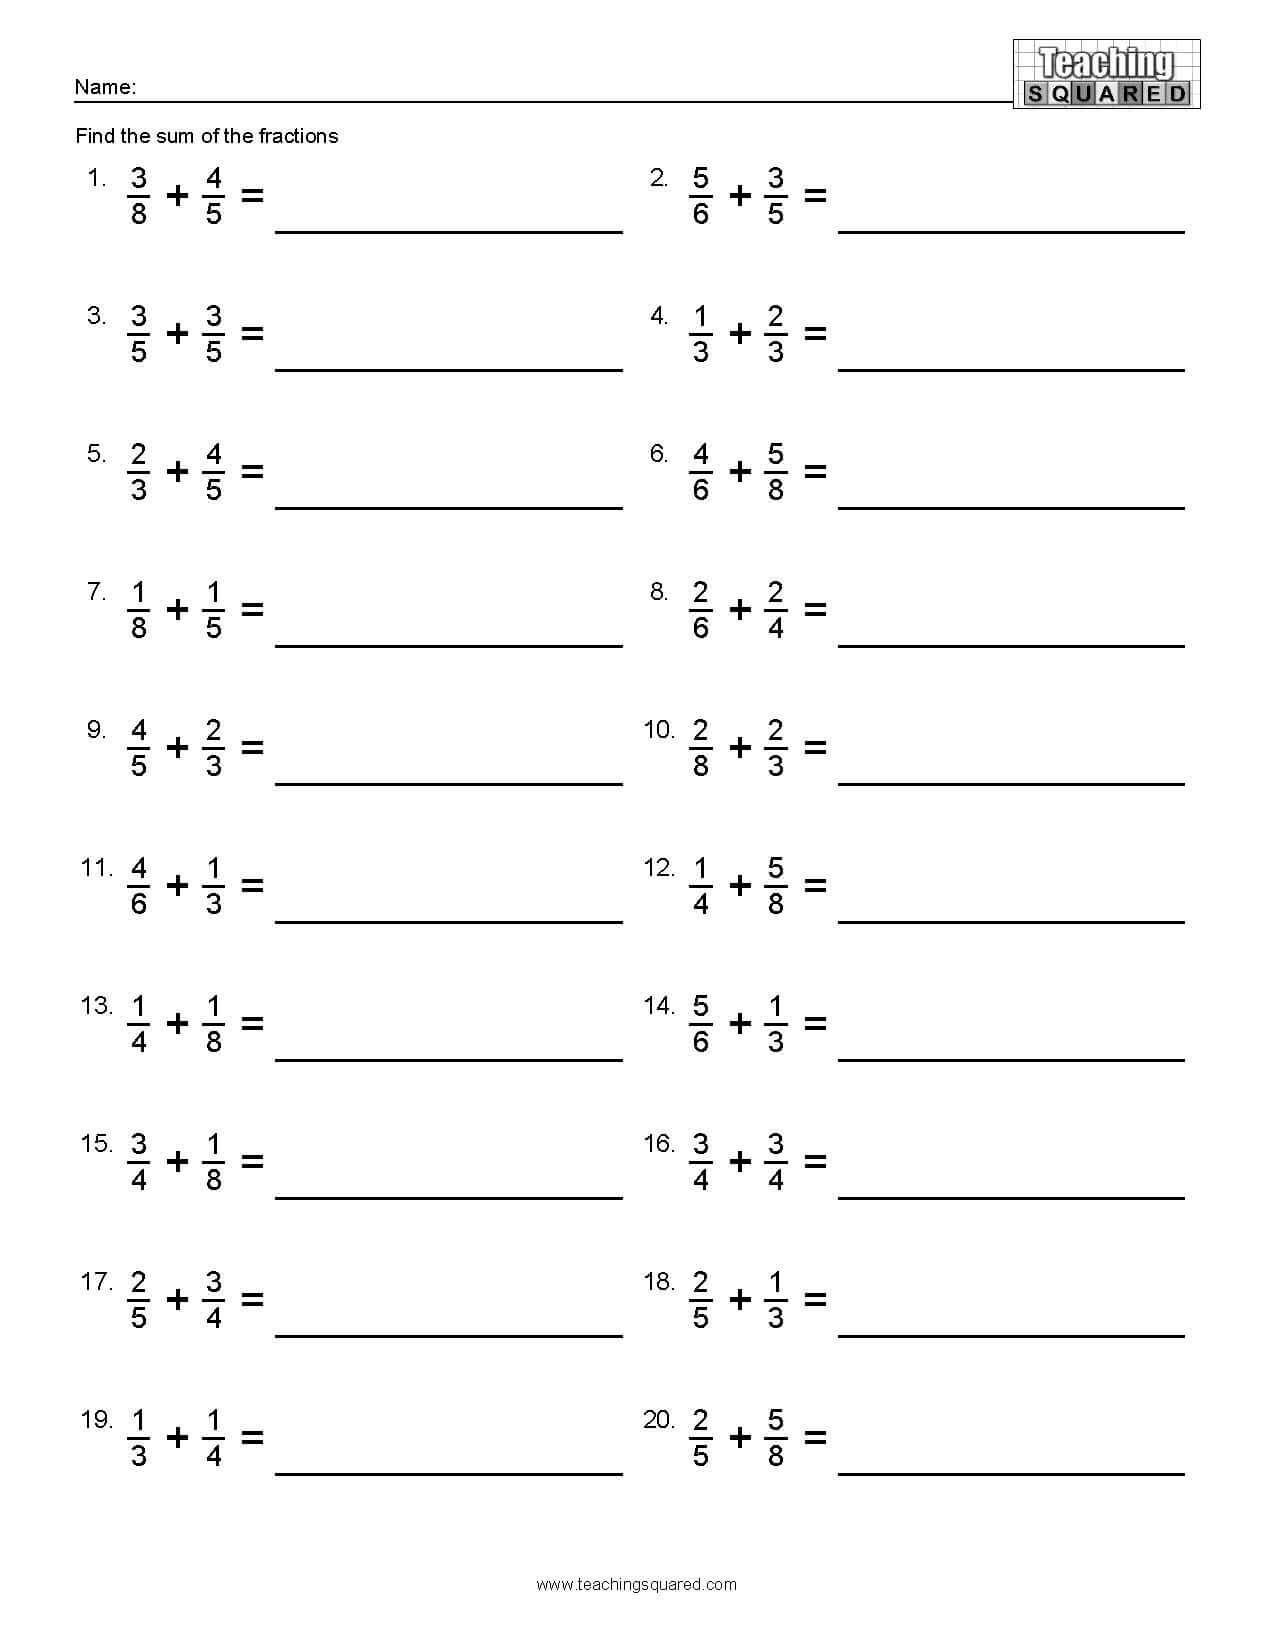 Adding Unlike Fractions - Teaching Squared Pertaining To Adding Fractions Worksheet Pdf